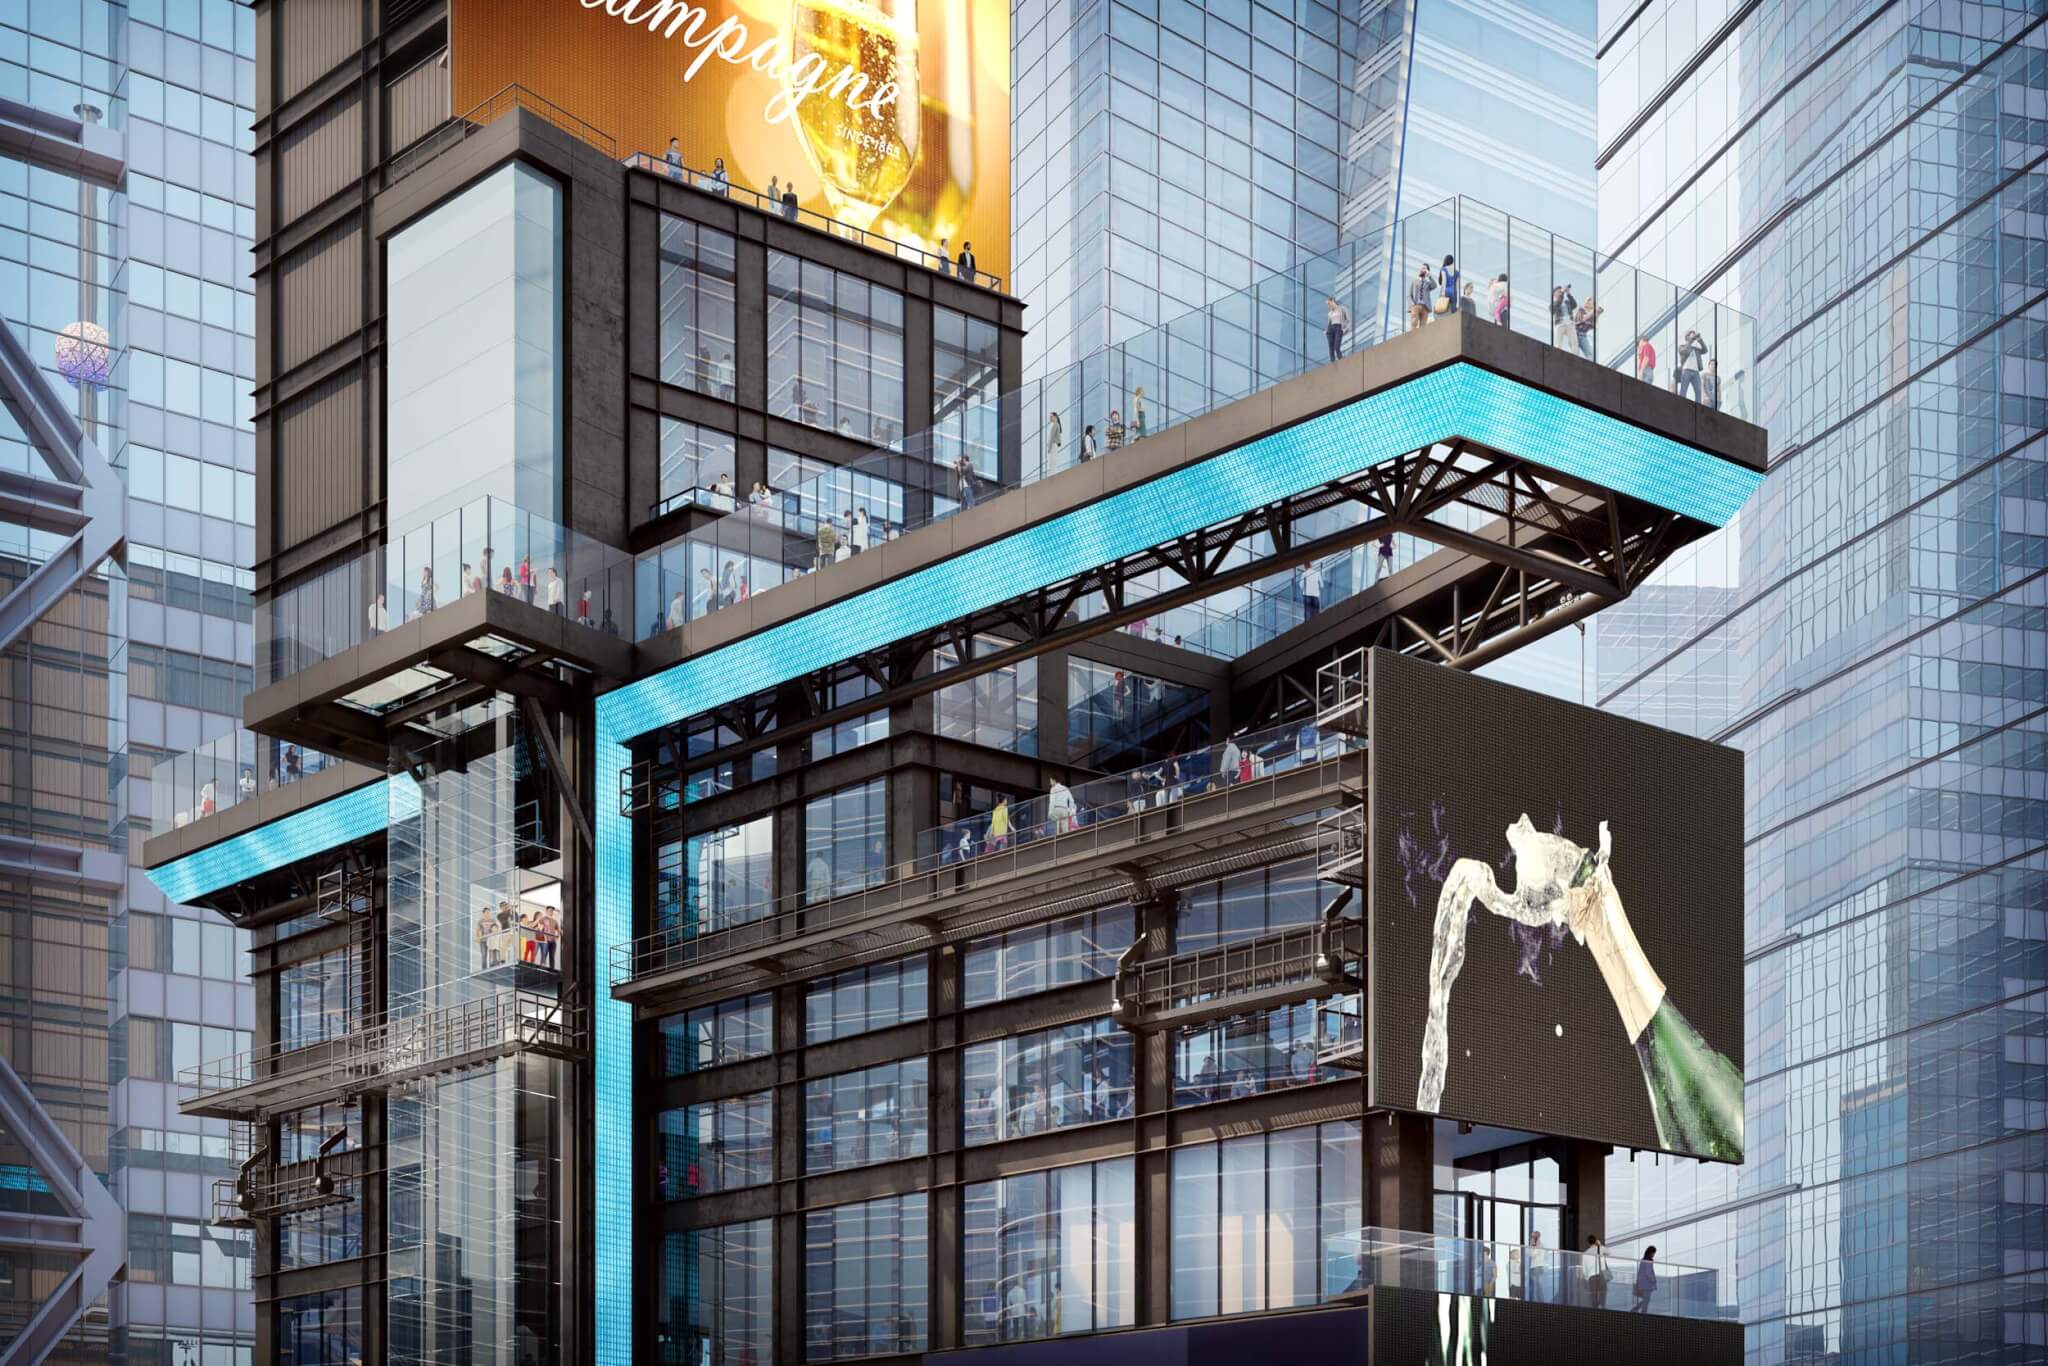 A renovation to One Times Square will add observation deck